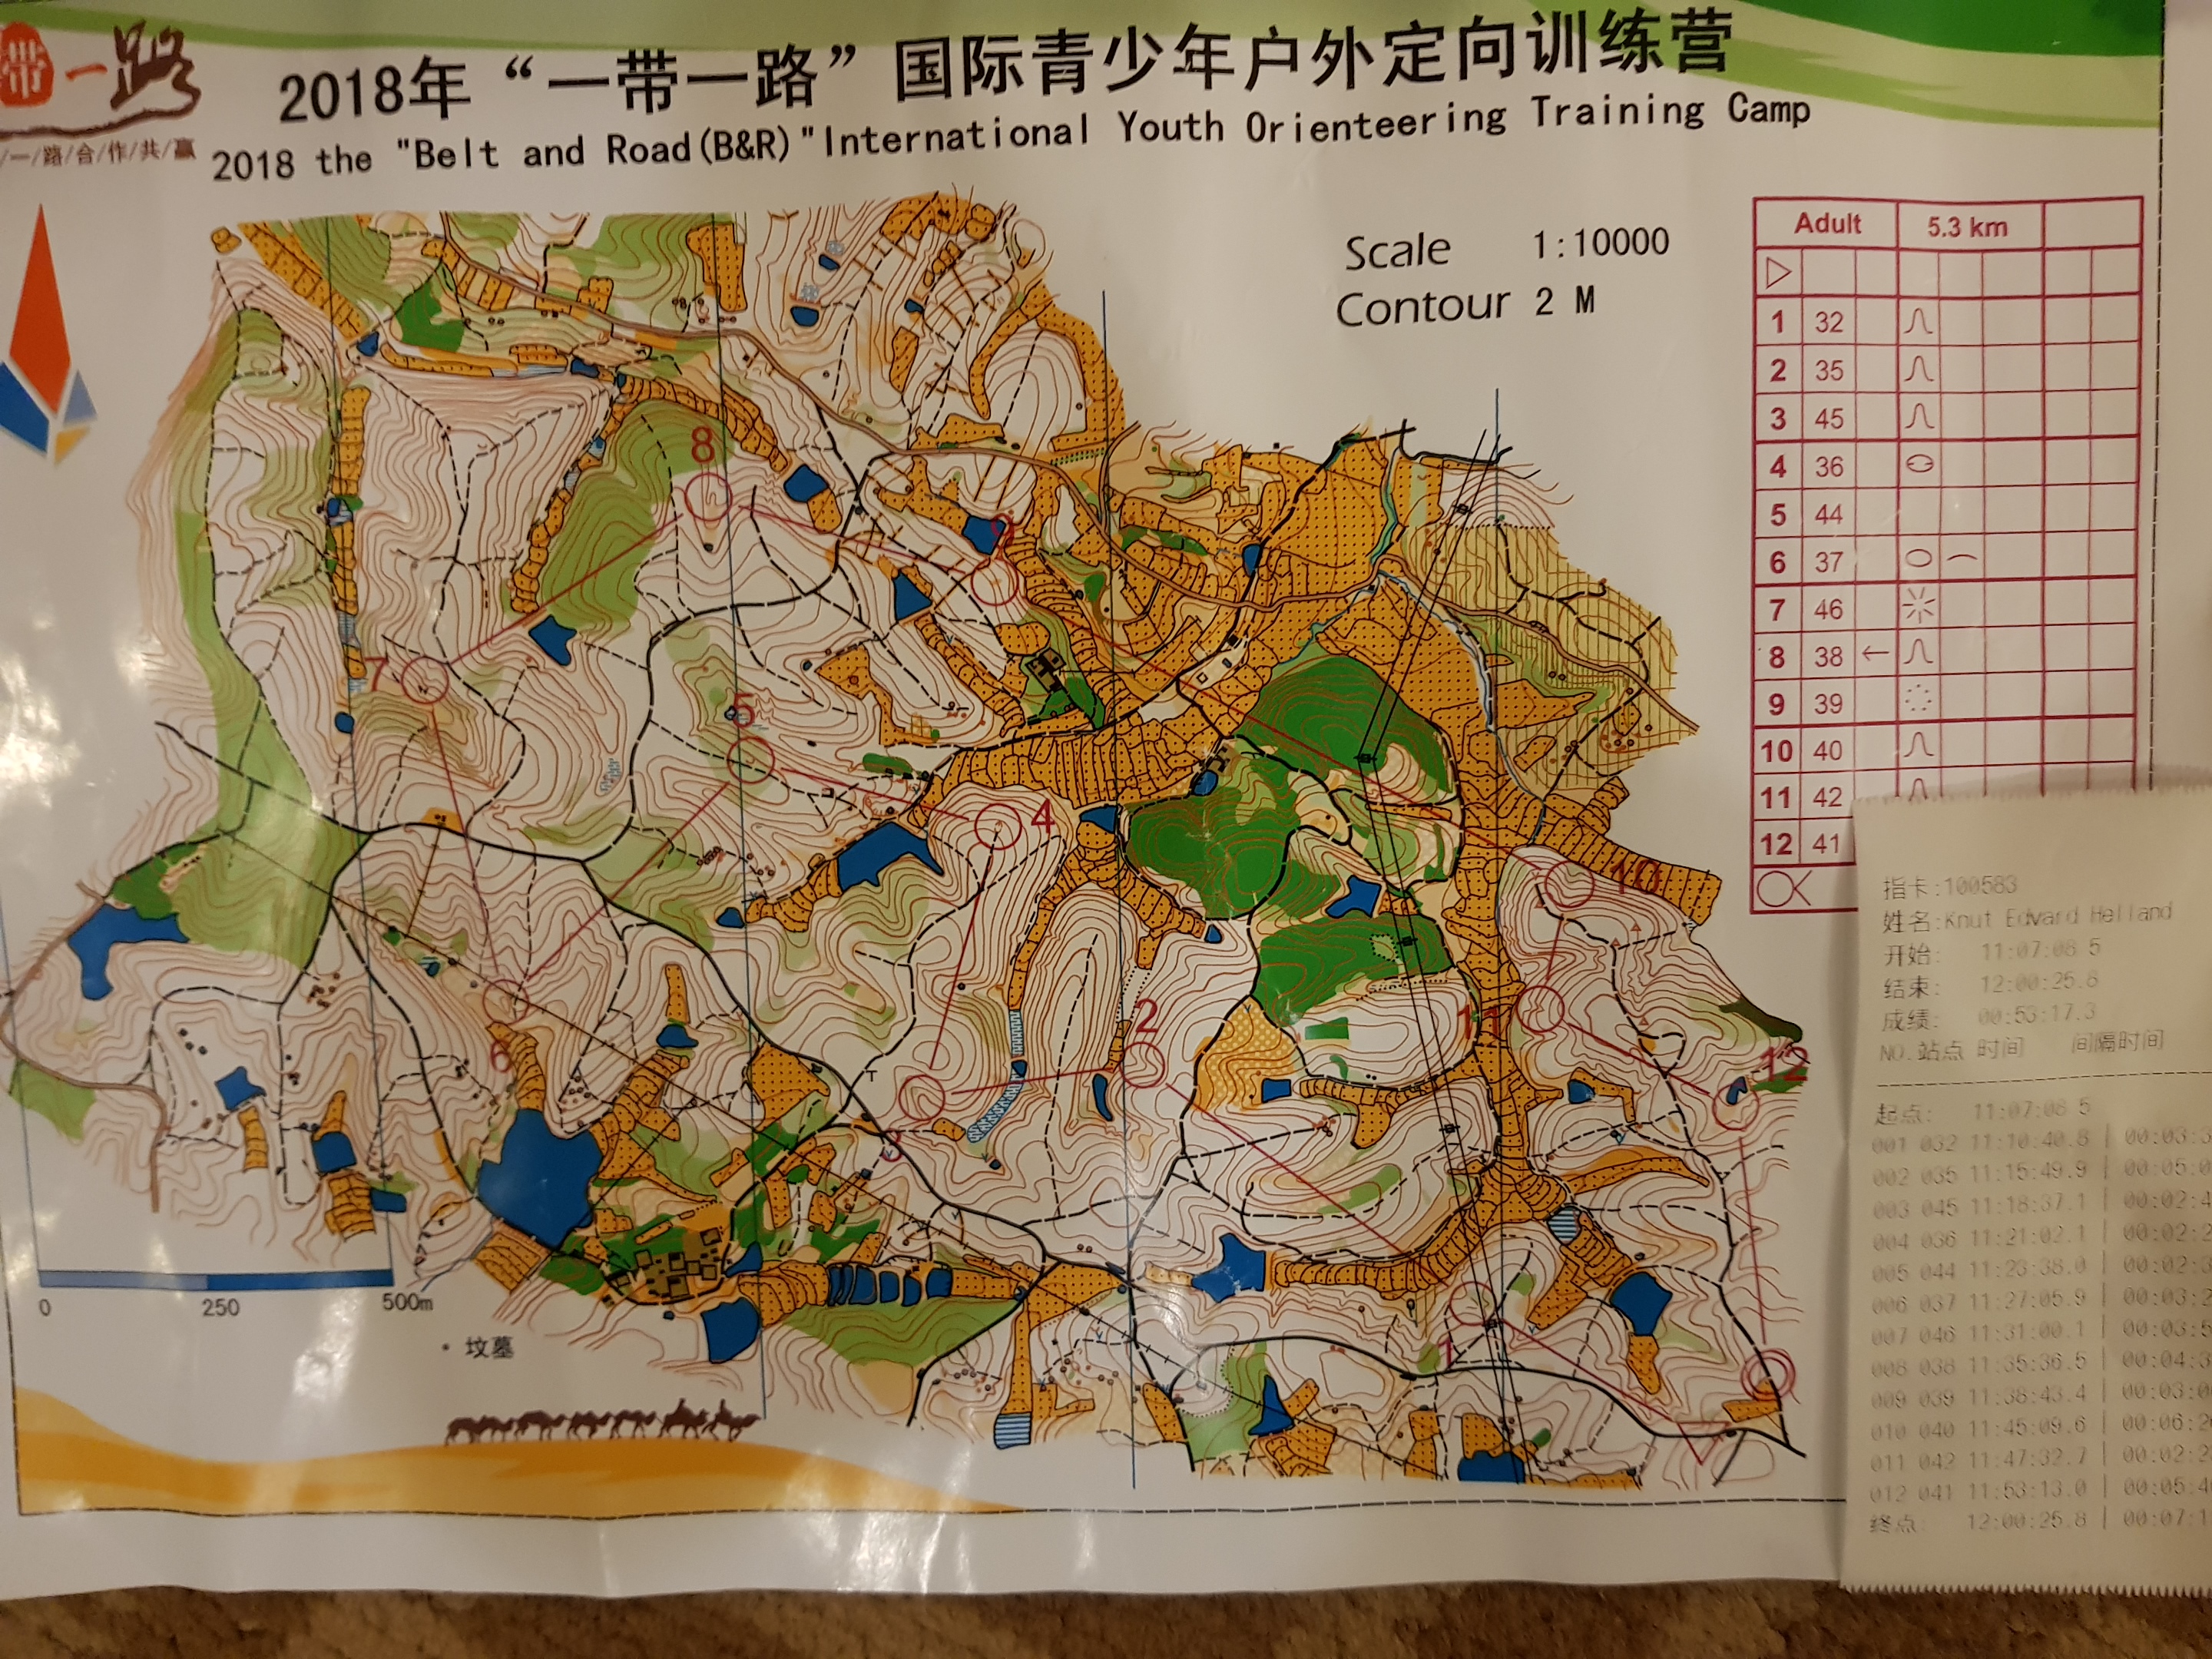 Belt and Road International Youth Orienteering Camp (25-10-2018)